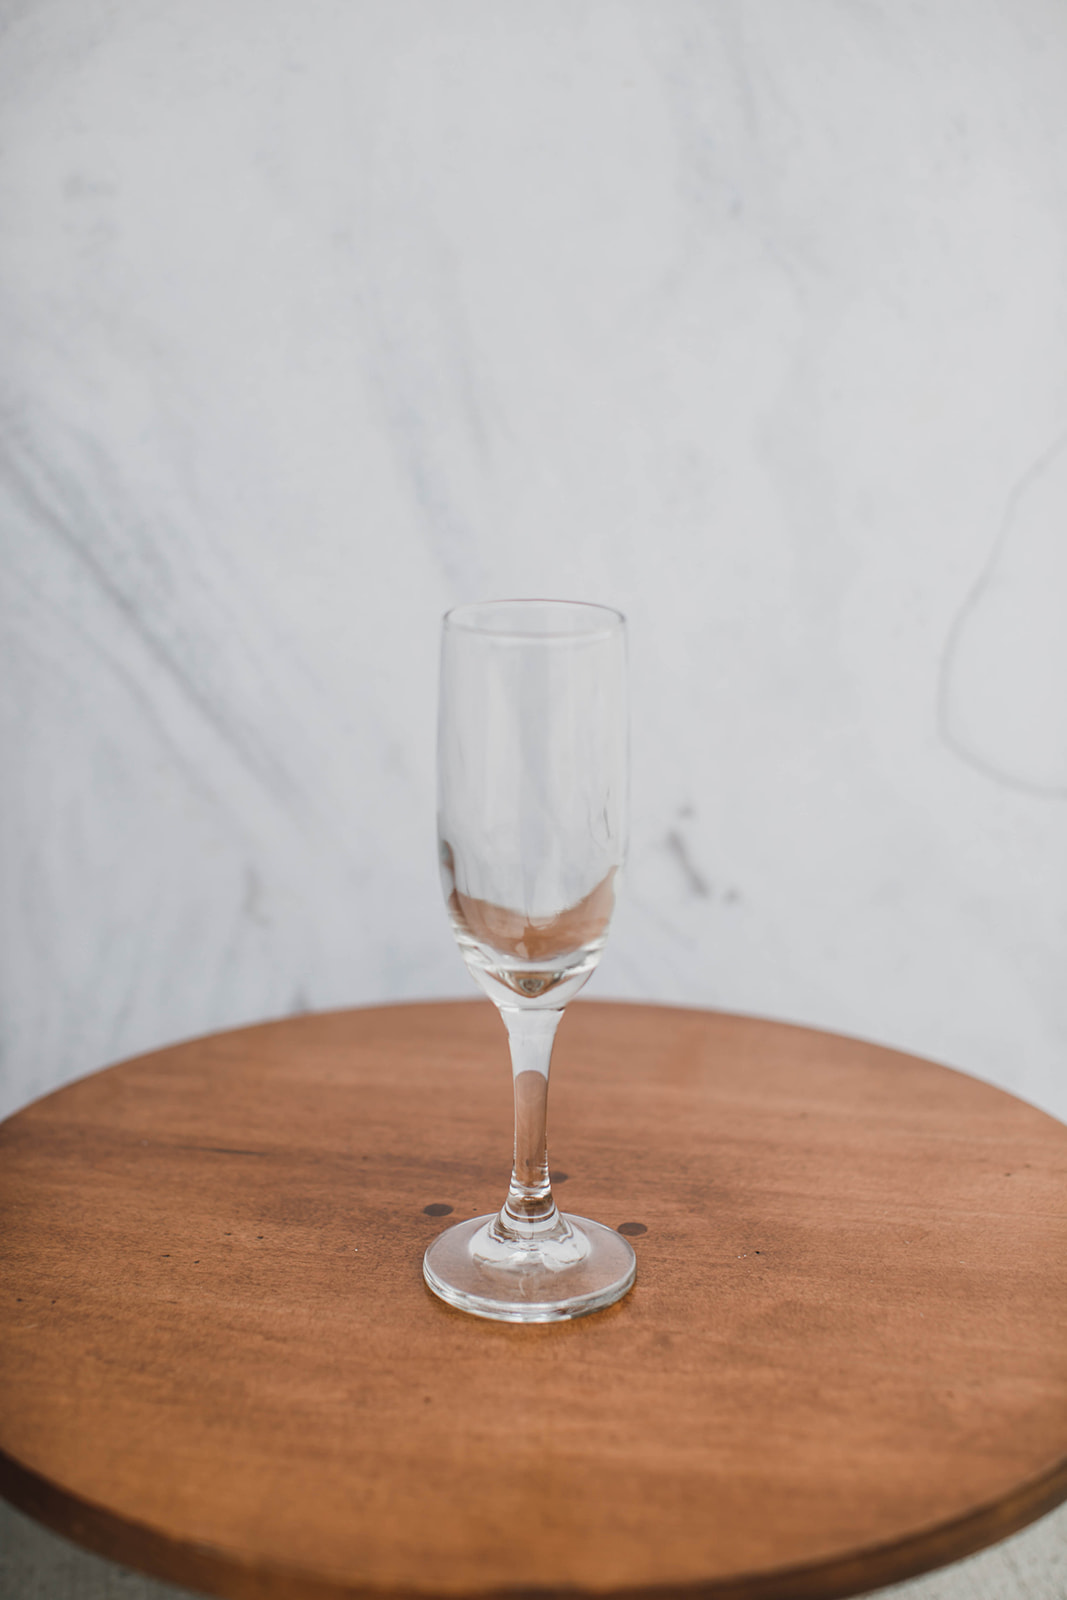 Champagne Flute Rental - A to Z Event Rentals, LLC.